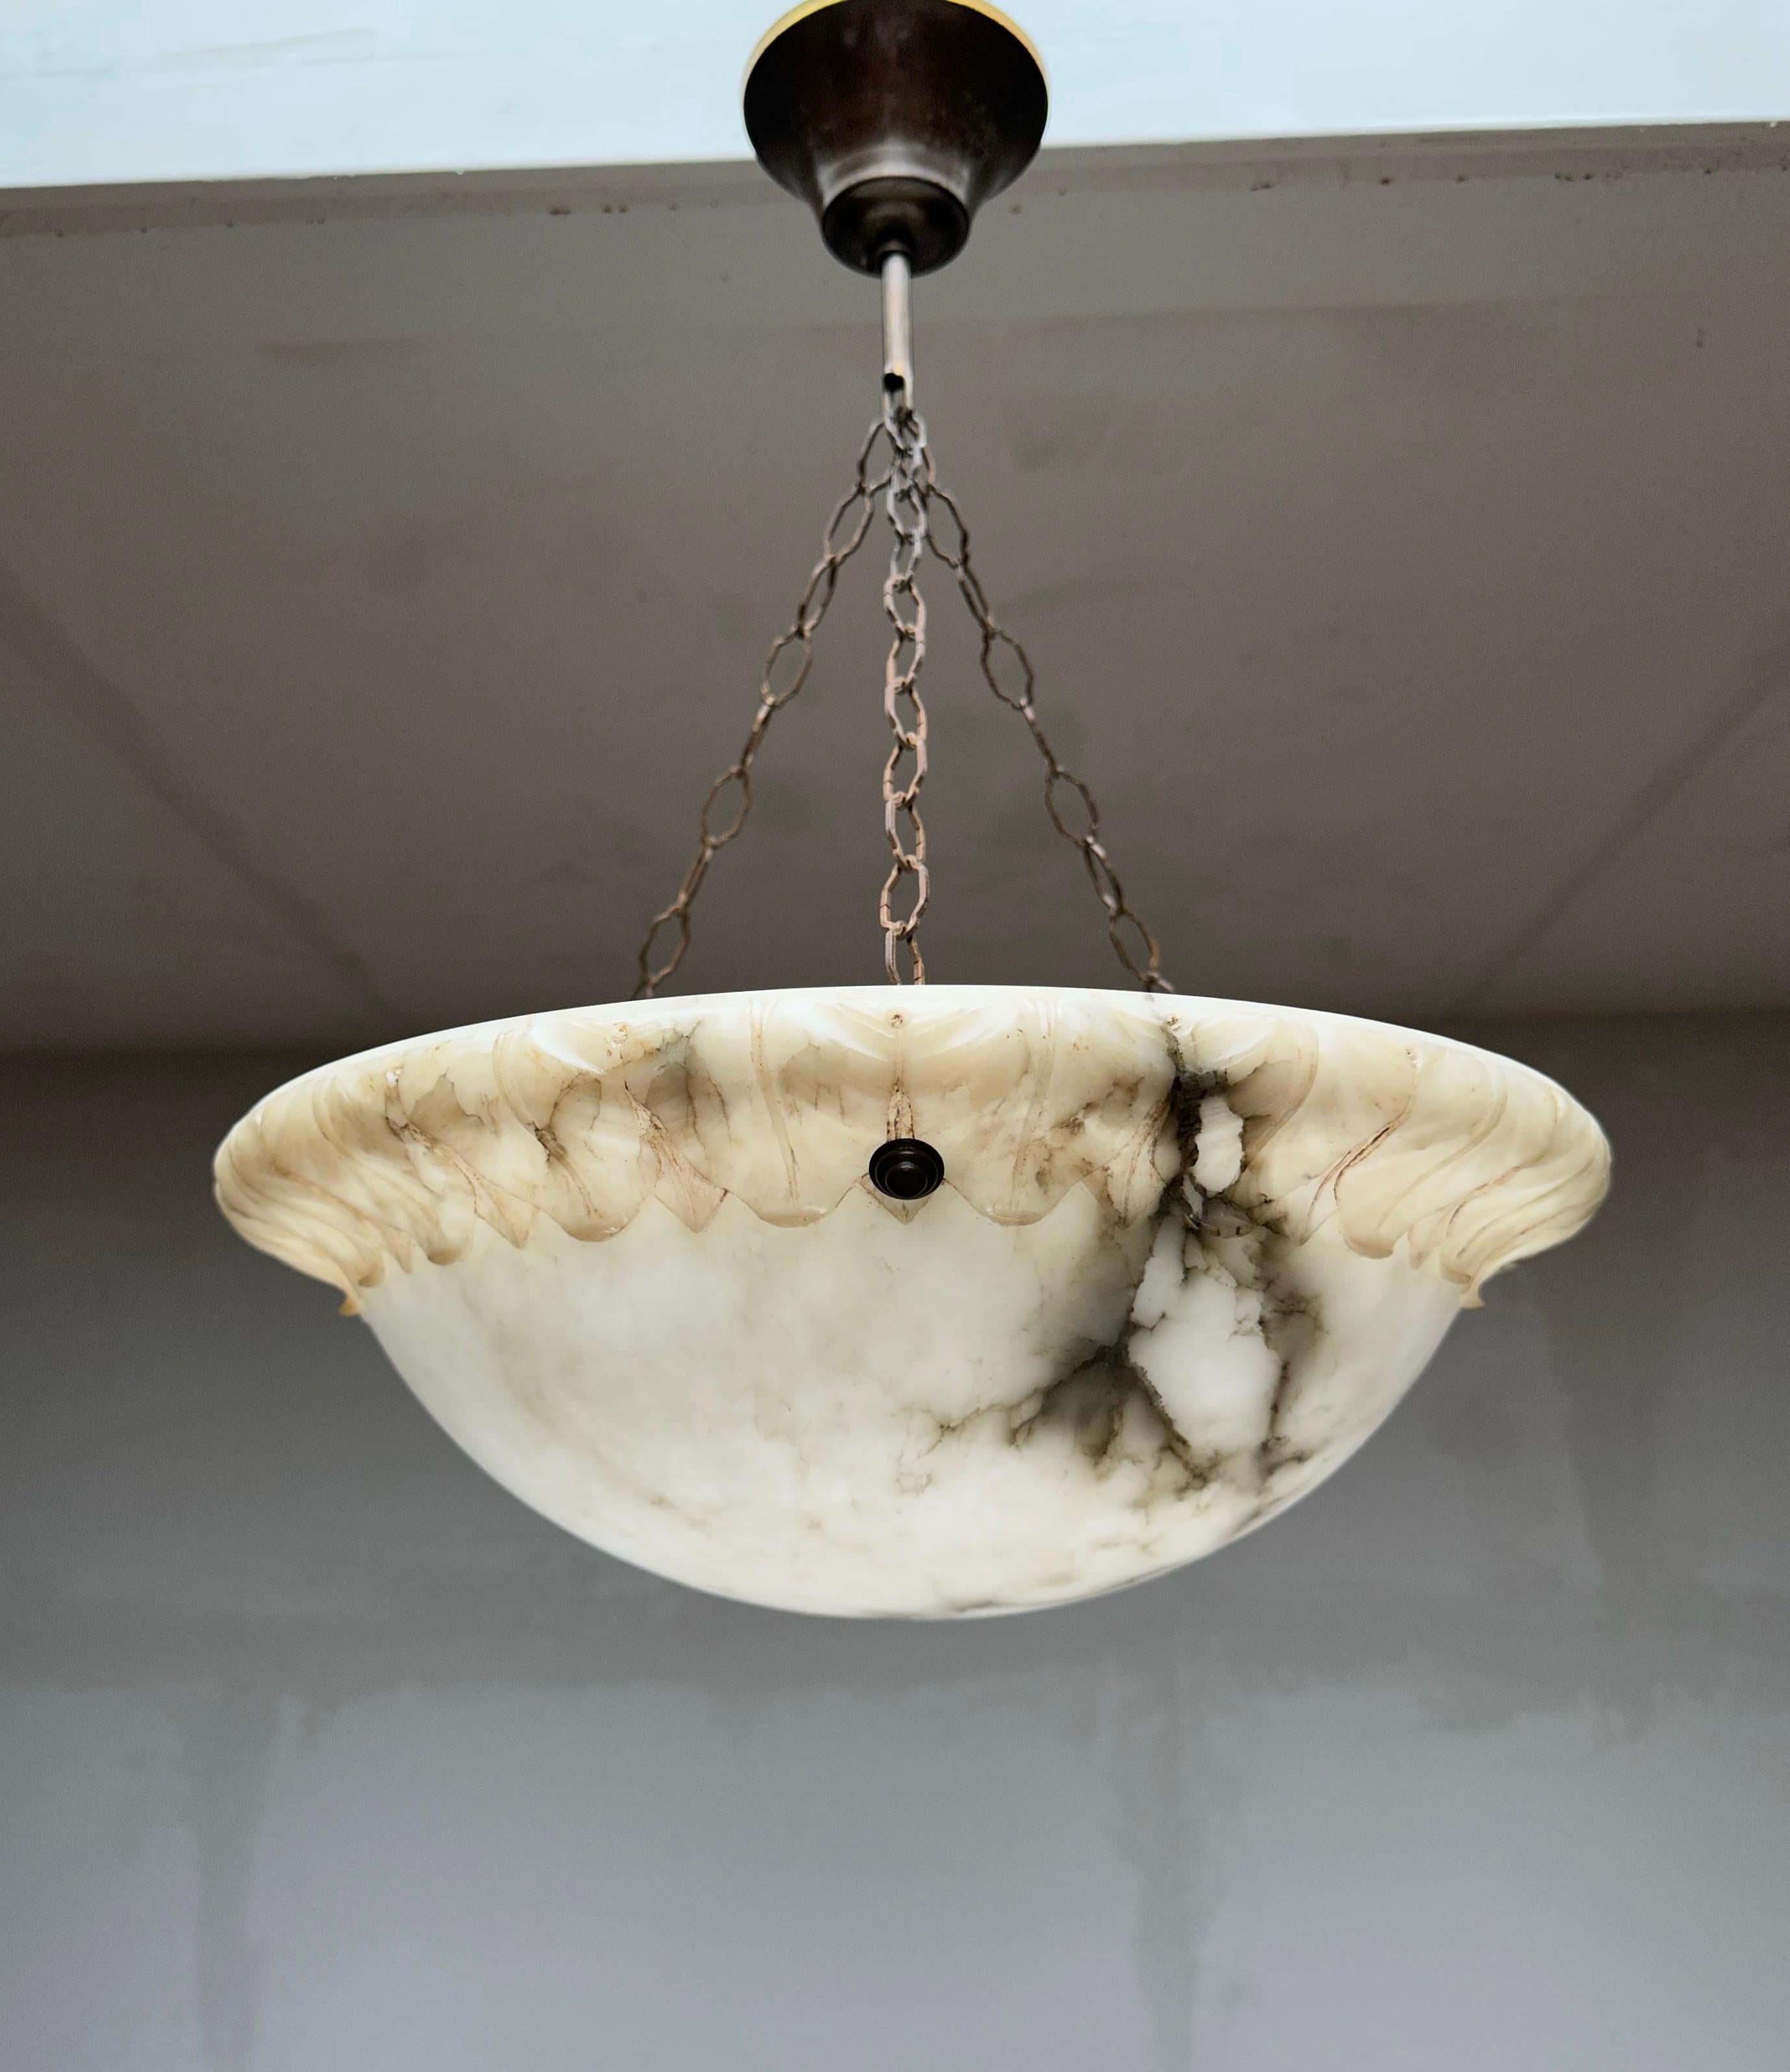 Art Deco Great Looking Antique and Mint Condition White & Black Alabaster Pendant Light